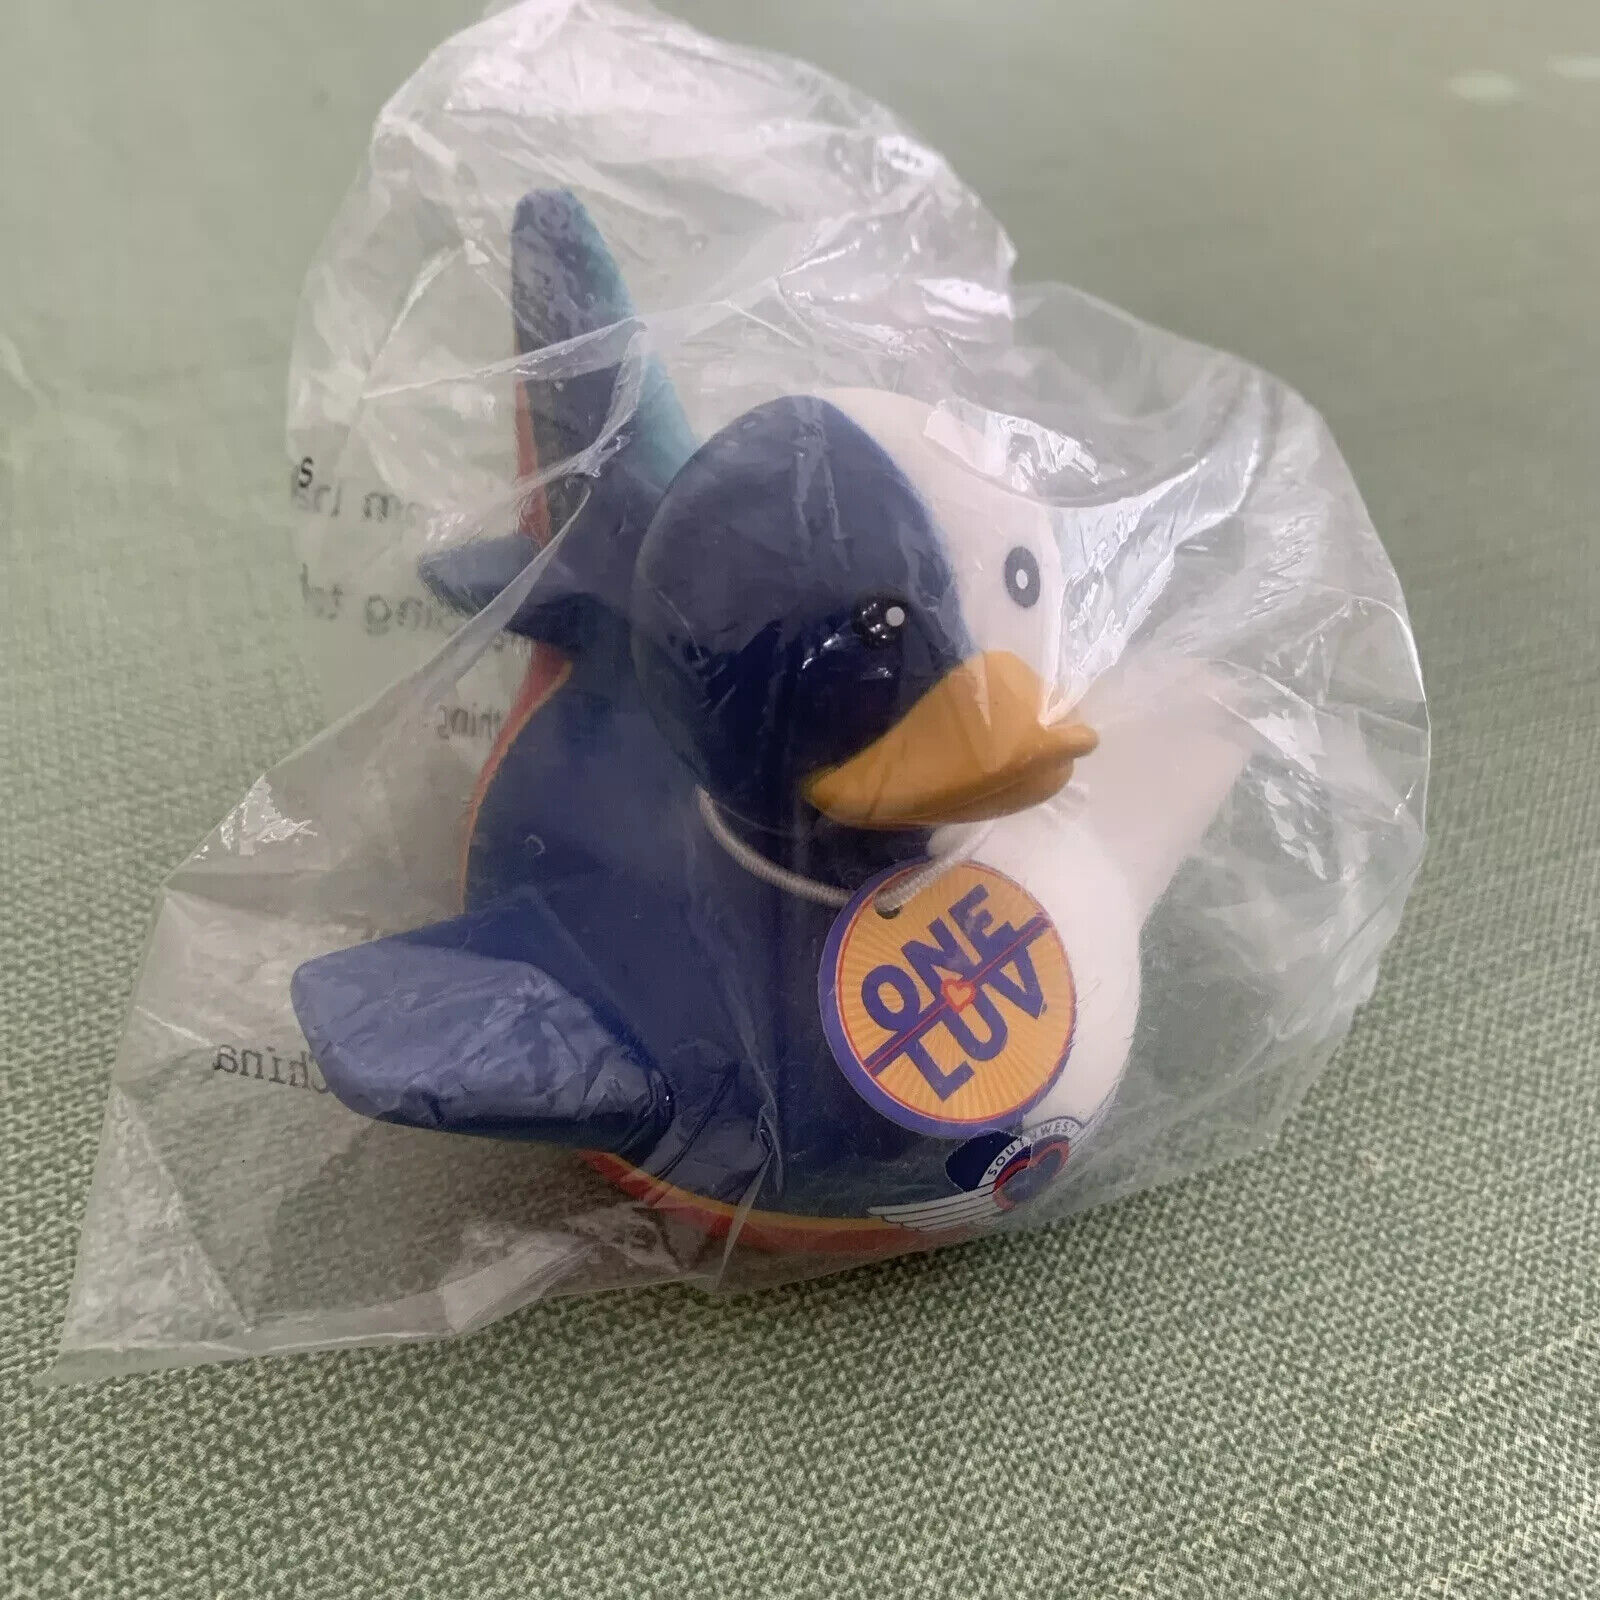 NEW Southwest Airtran Airlines Rubber Duckie One Luv Birds Of Feather 2011